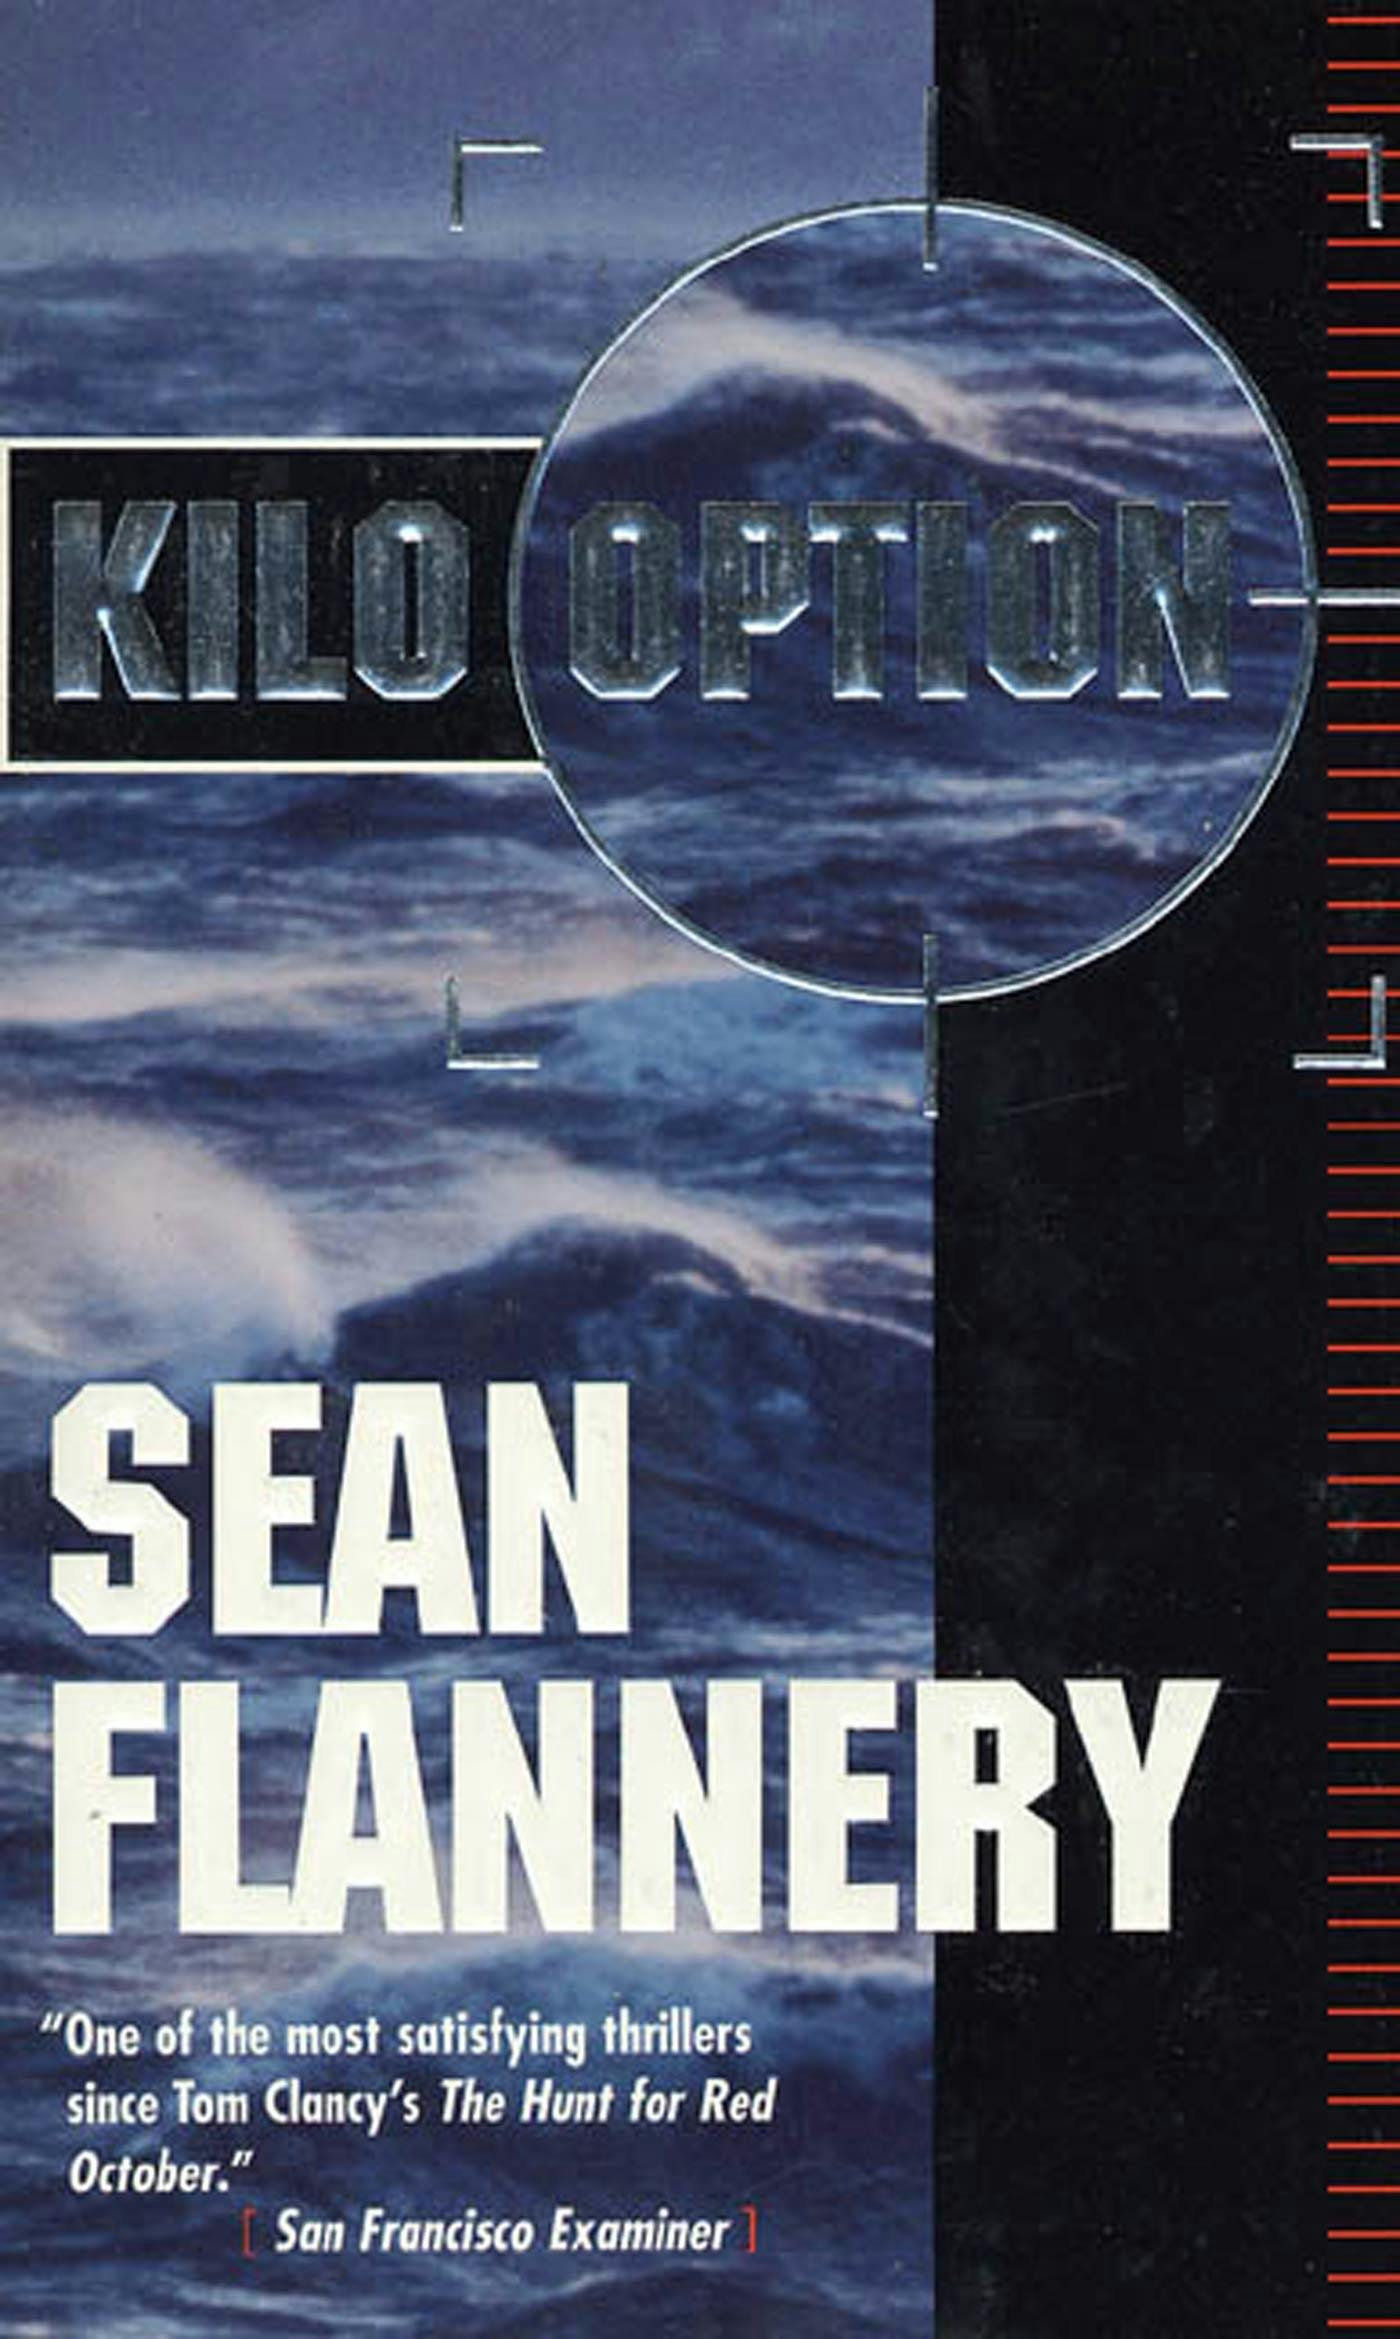 Cover for the book titled as: Kilo Option